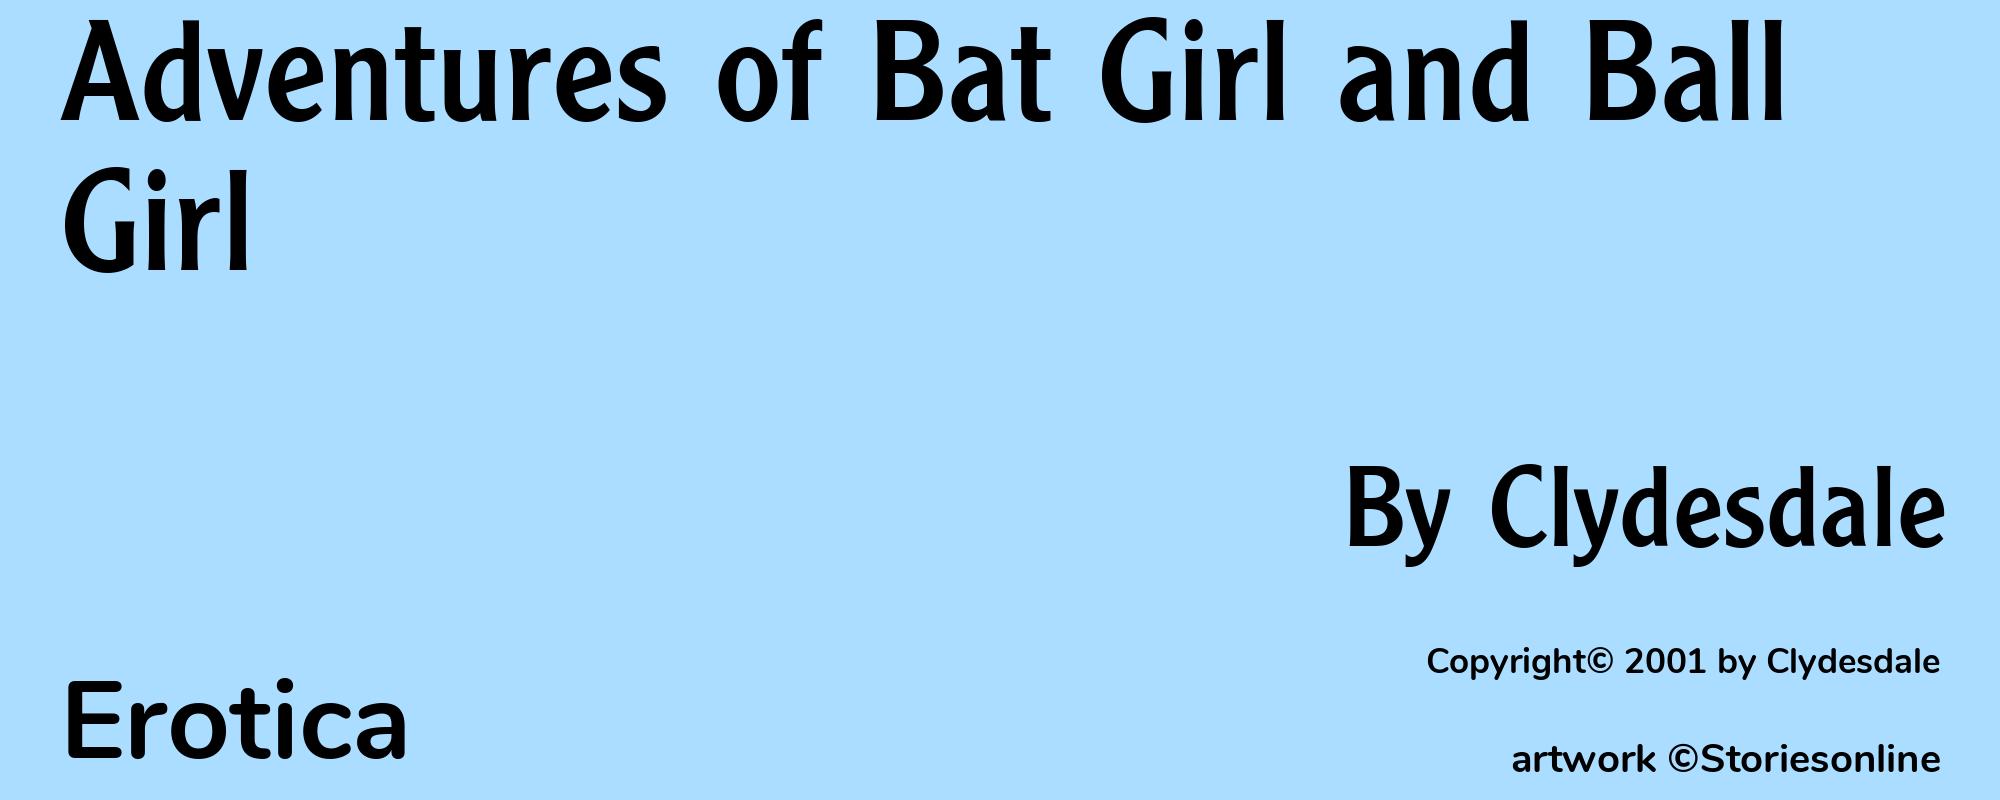 Adventures of Bat Girl and Ball Girl - Cover